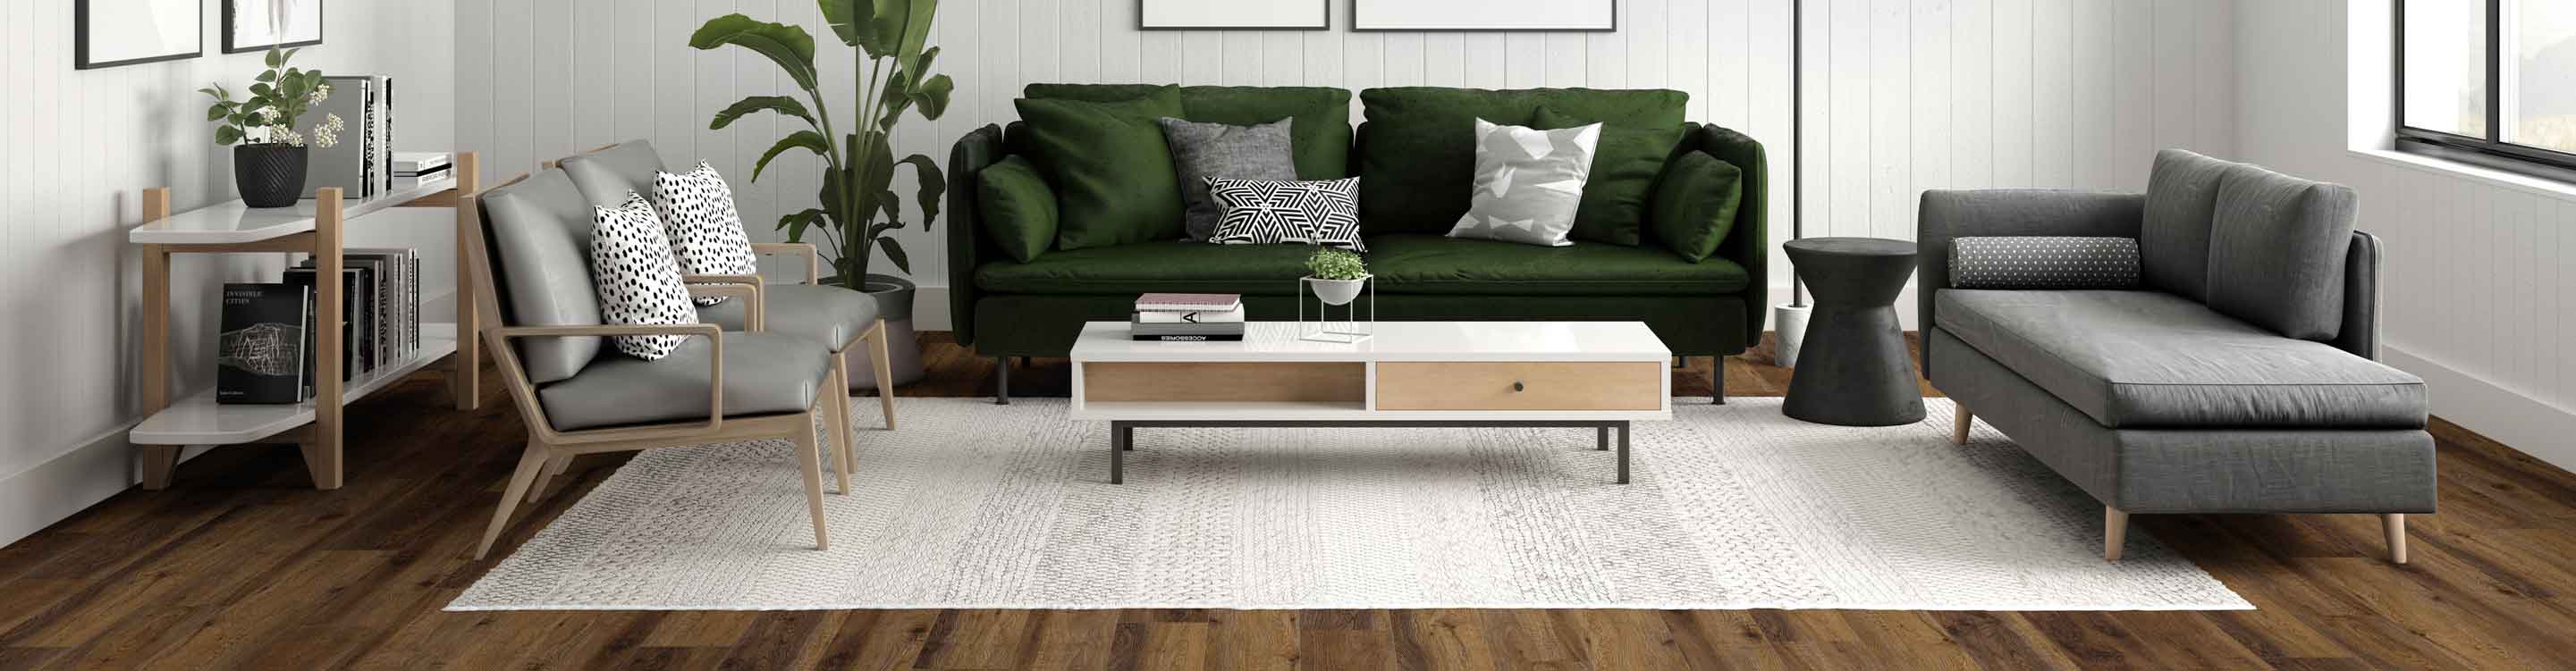 black and white pattered area rug in midcentury living room with green couch